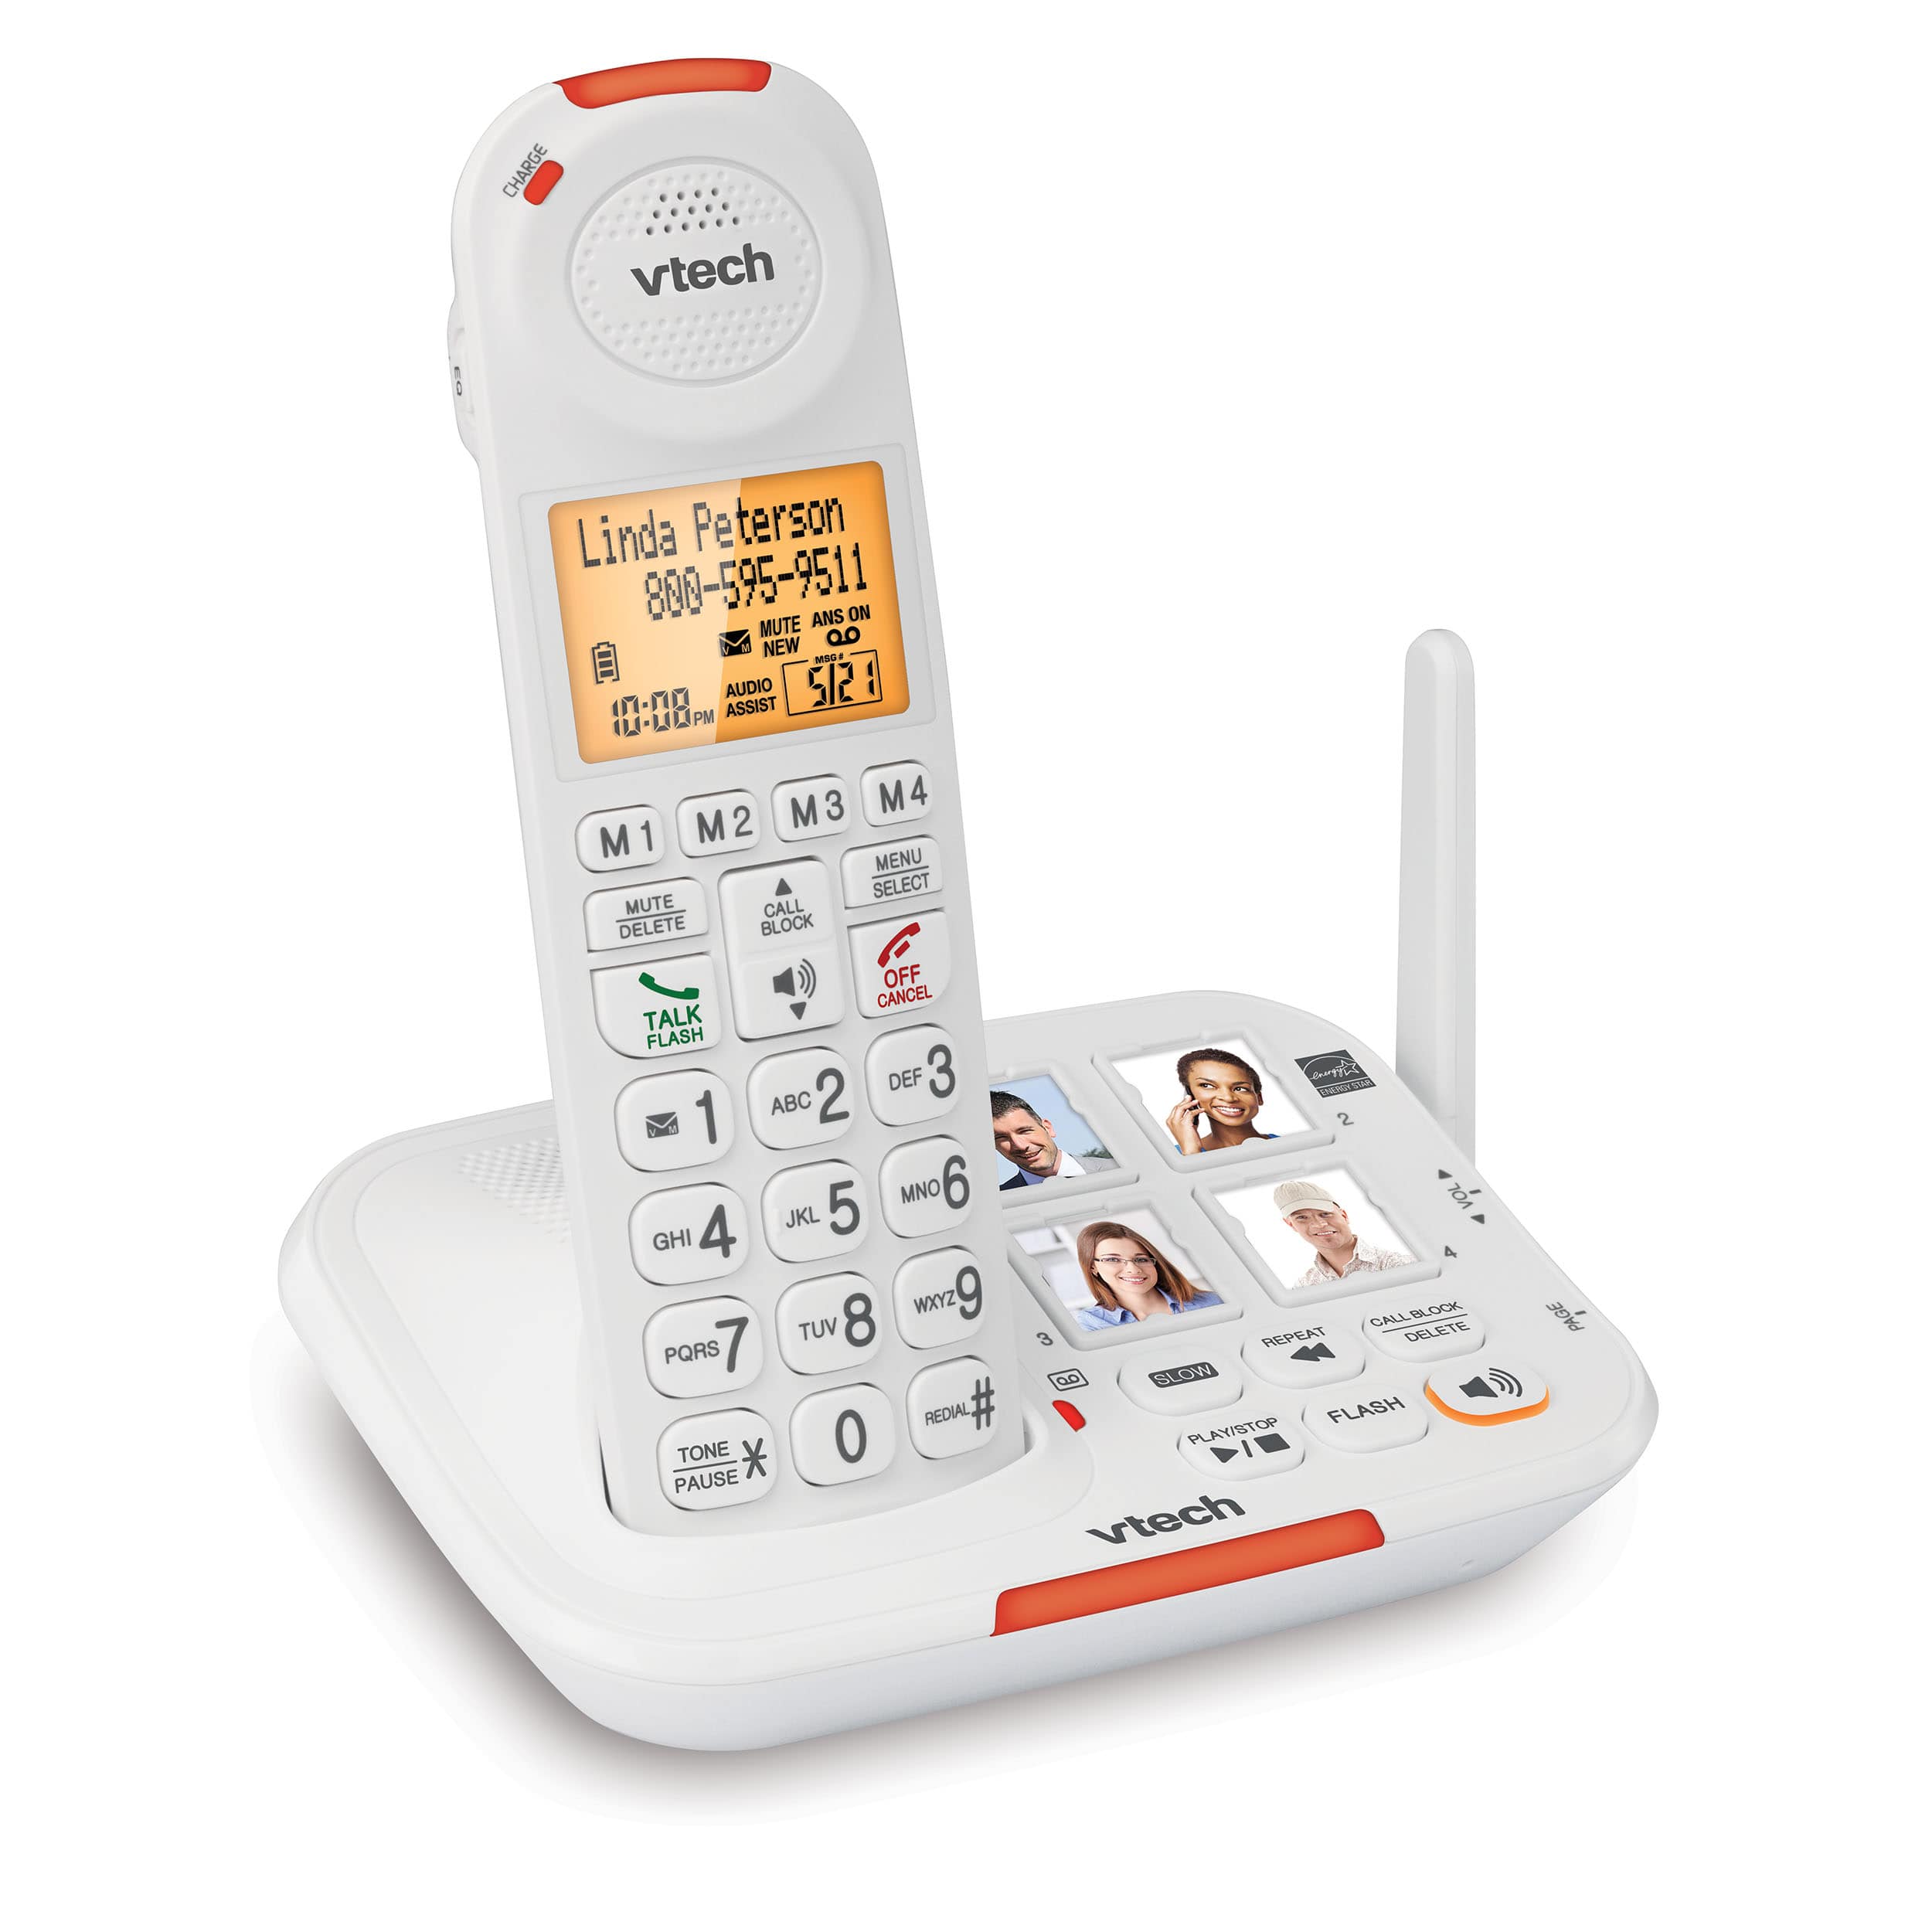 Amplified Cordless Phone with Answering System, Big Buttons, Extra-Loud Ringer & Smart Call Blocker - view 3